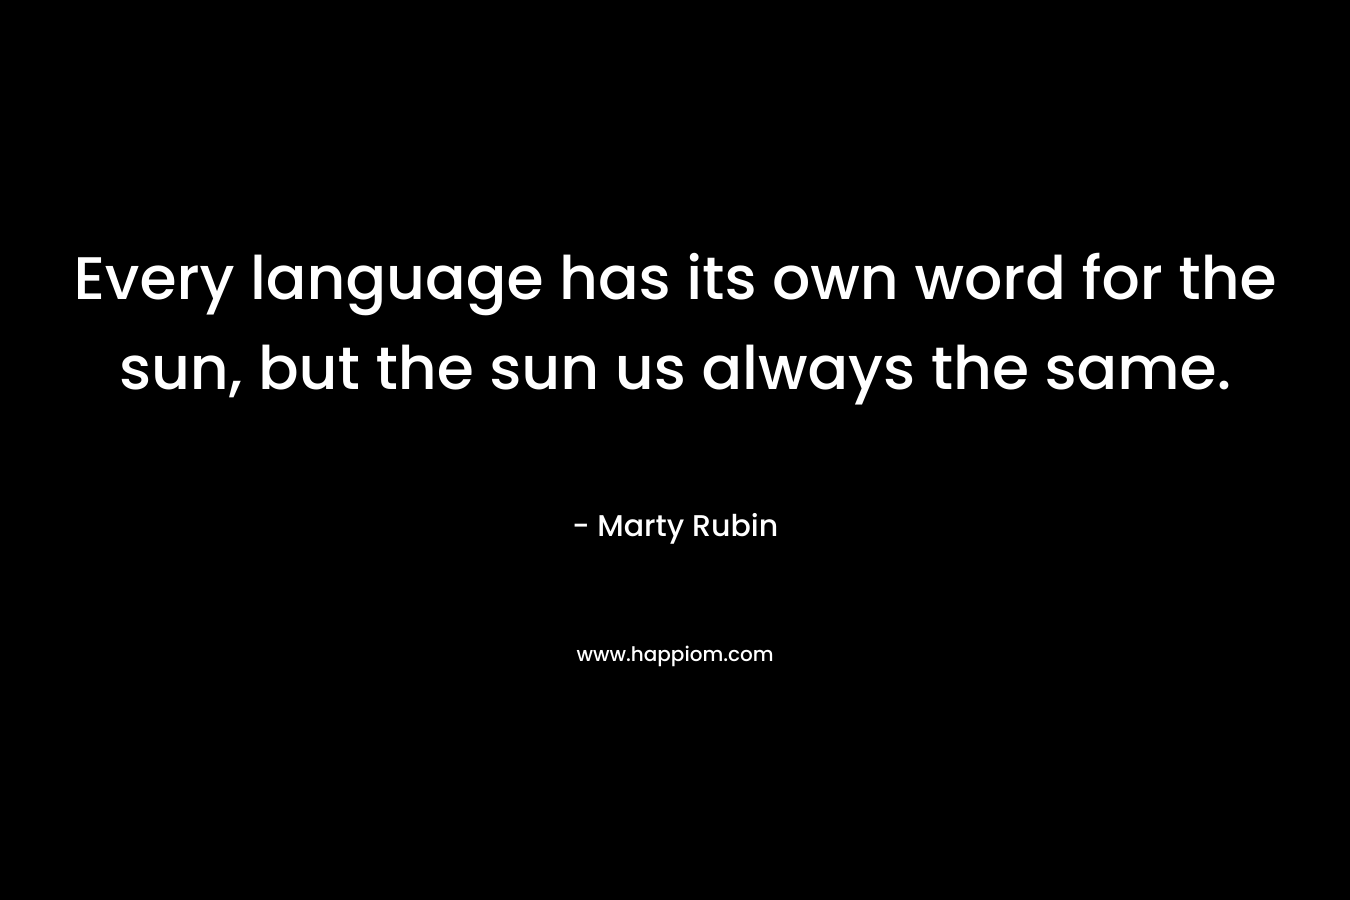 Every language has its own word for the sun, but the sun us always the same.